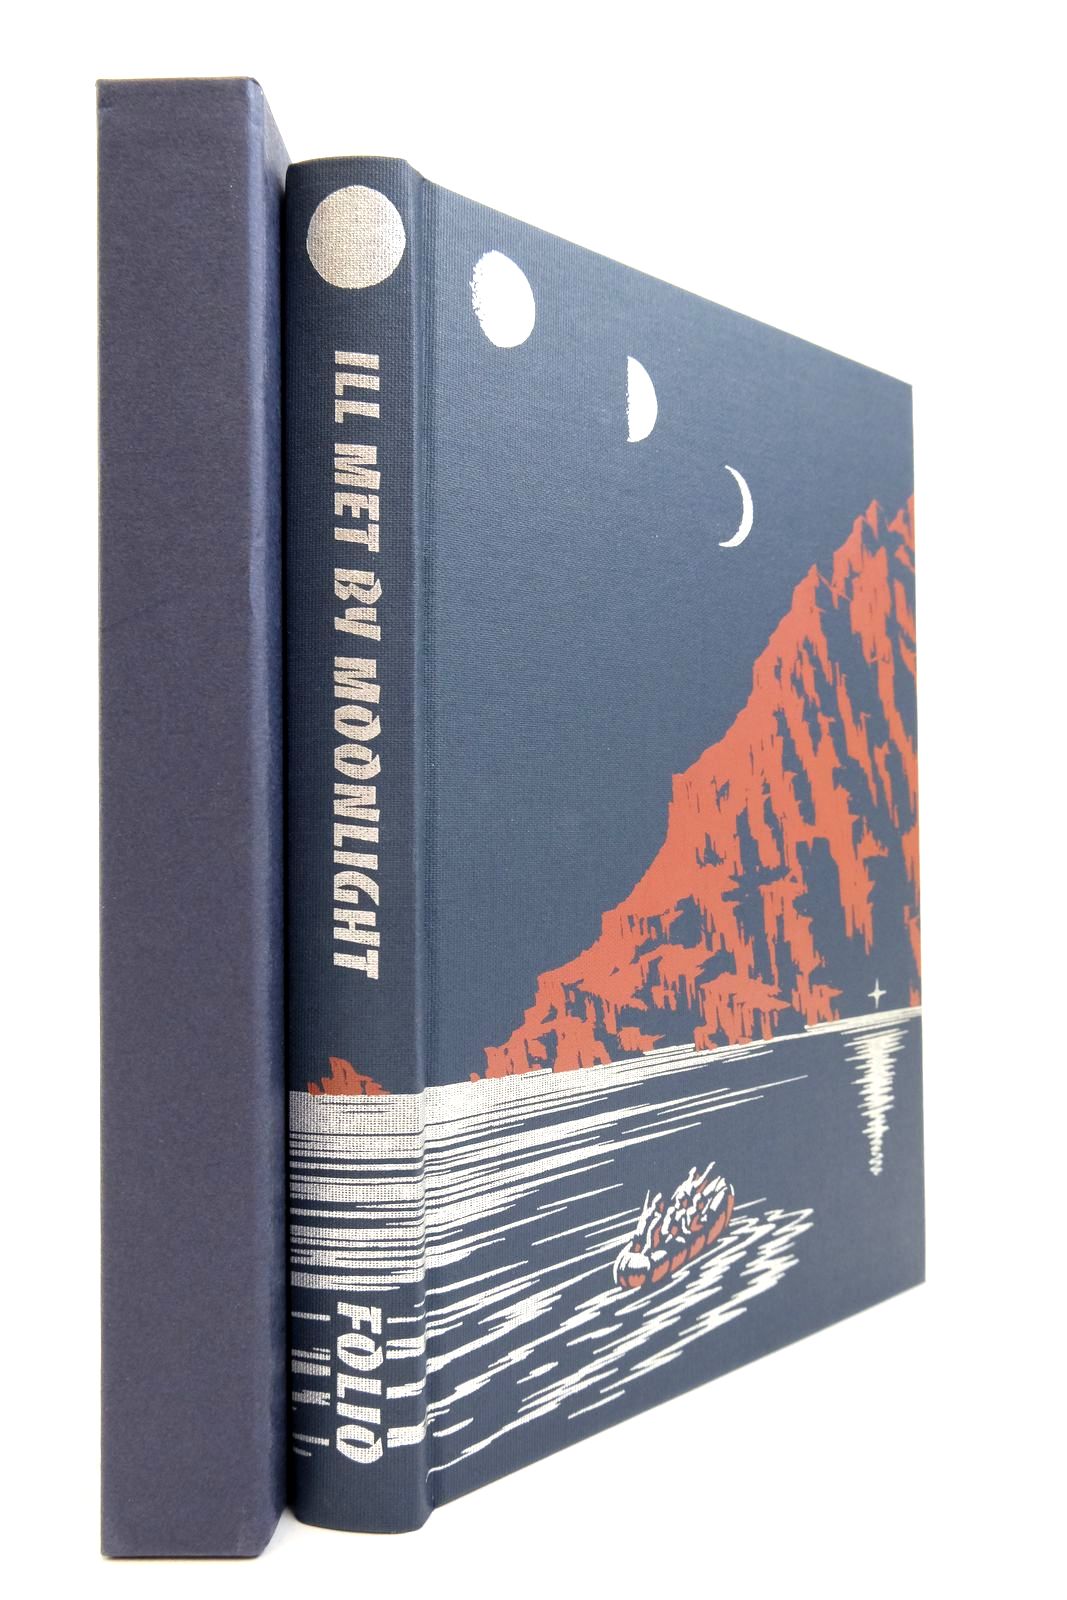 Photo of ILL MET BY MOONLIGHT written by Moss, W. Stanley Foot, M.R.D. Moncreiffe, Iain Fermor, Patrick Leigh published by Folio Society (STOCK CODE: 2139458)  for sale by Stella & Rose's Books